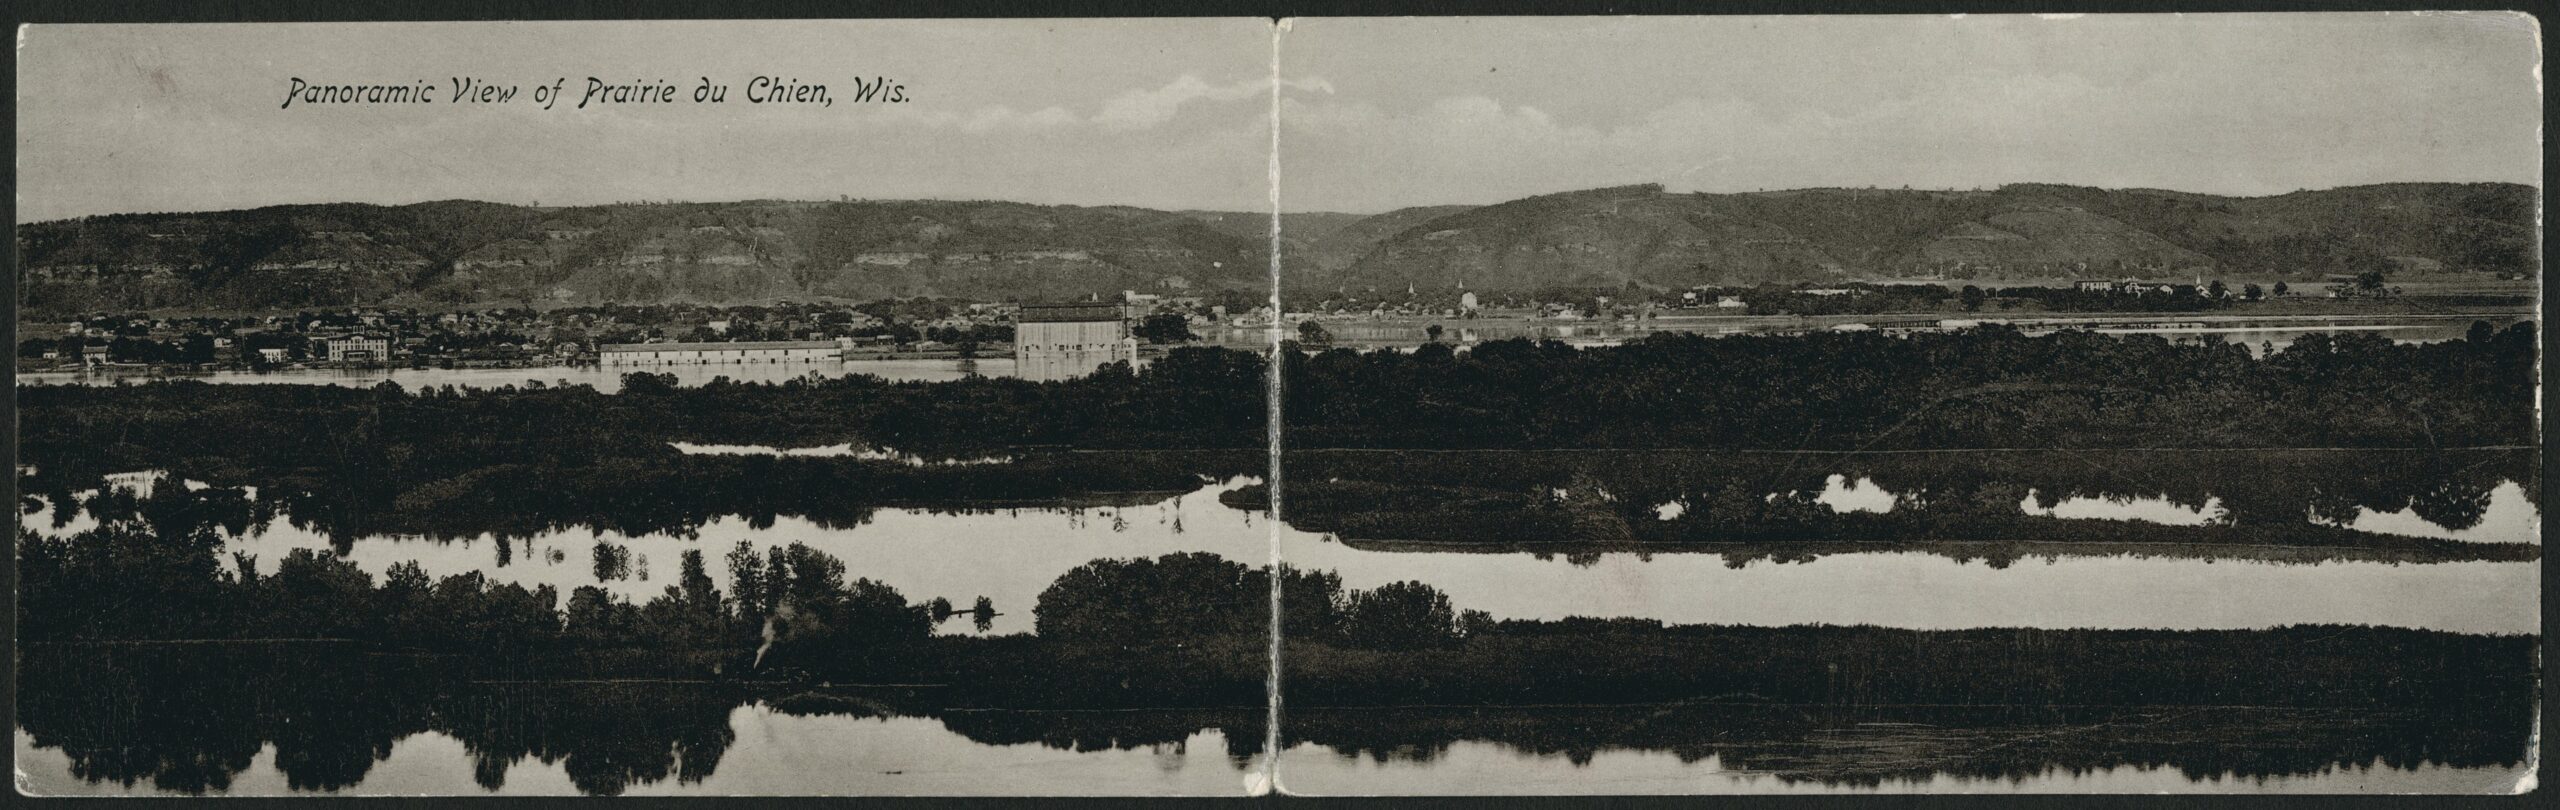 A postcard of a panoramic view of the town of Prairie du Chien with the Mississippi River in the foreground and bluffs in the background in November, 1911.